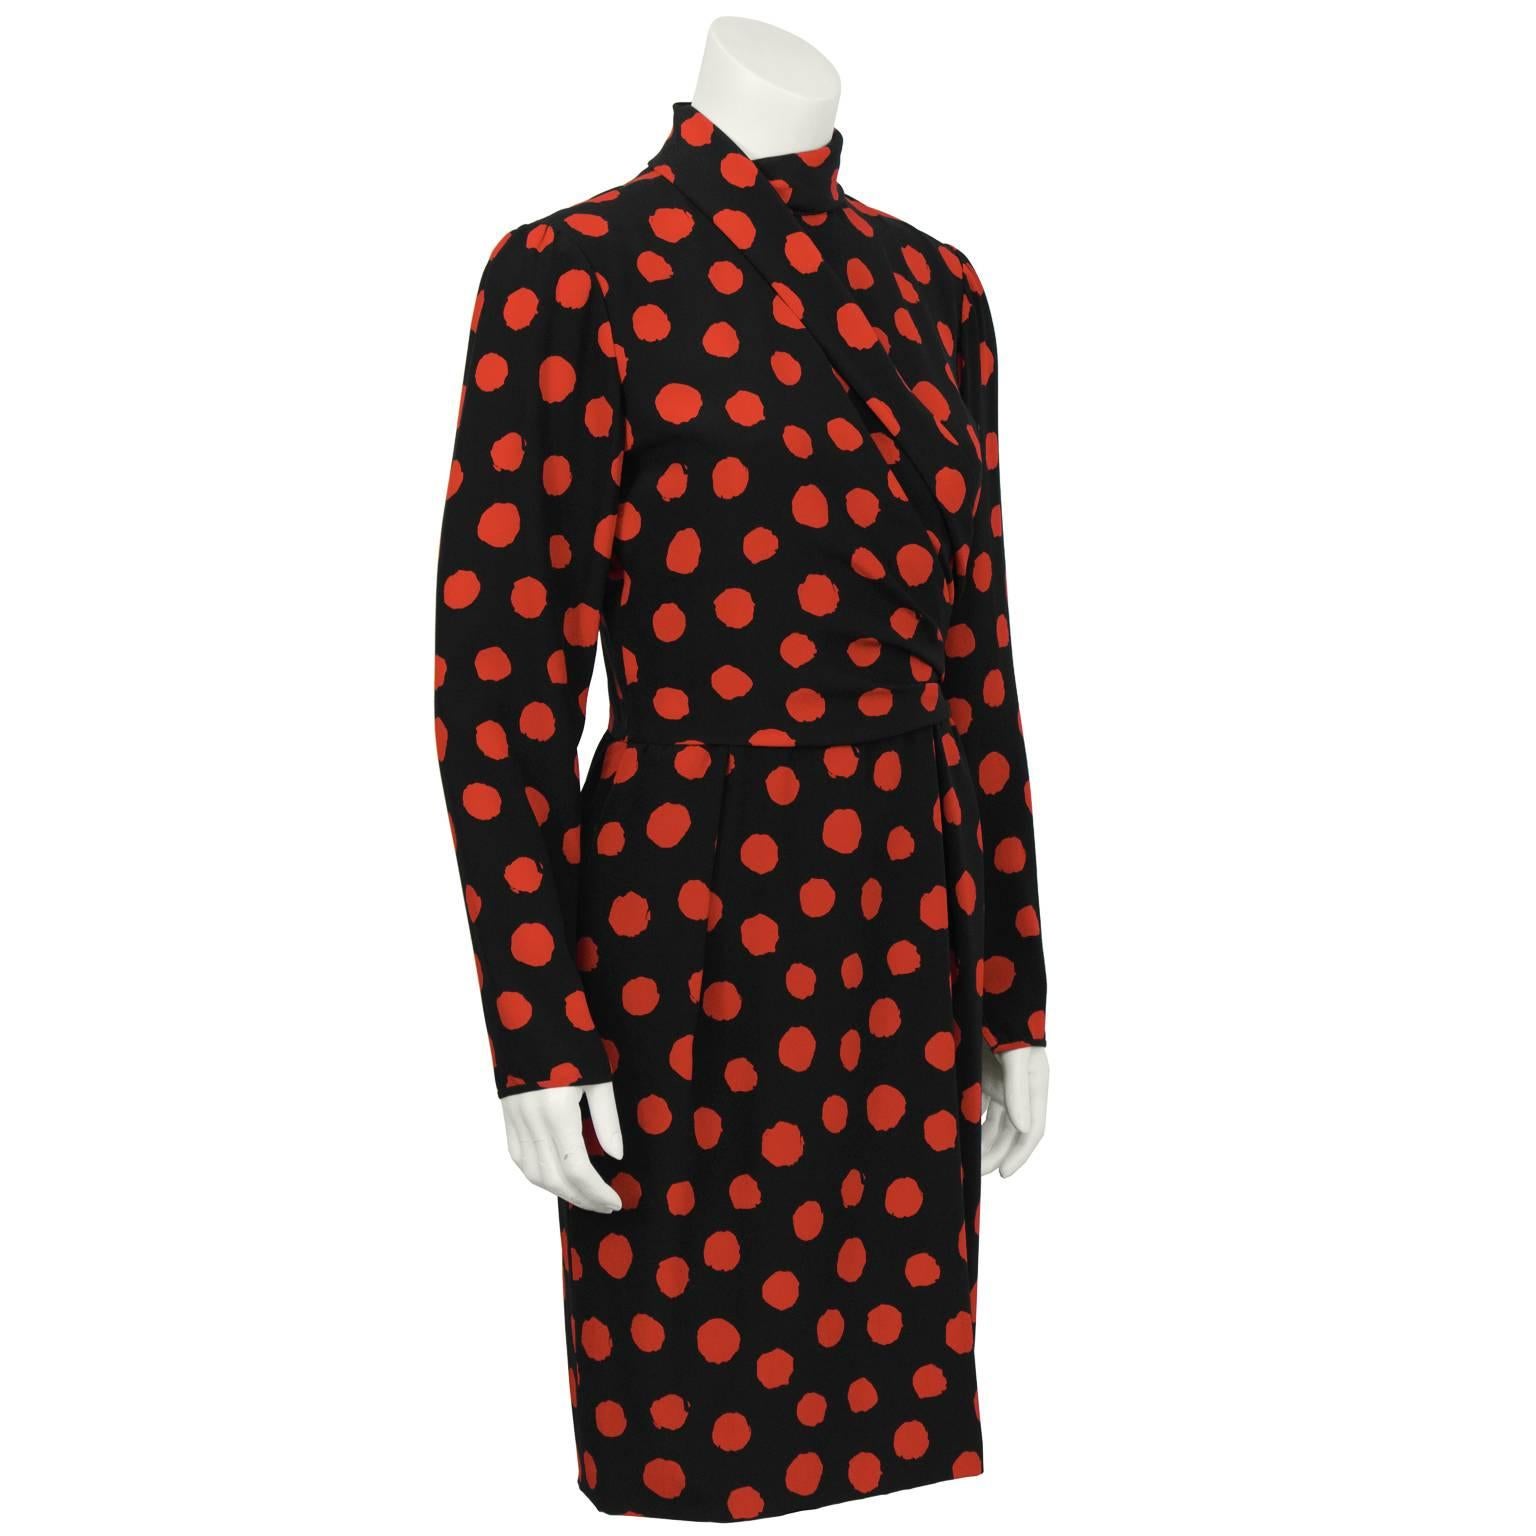 This black and red silk Ungaro day/dinner dress from the 1980's has a unique folded high collar that continues to a faux overlapping wrap detail across the front and gathers at the side. Sleeve finishes with zipper at the cuff, the skirt has inseam